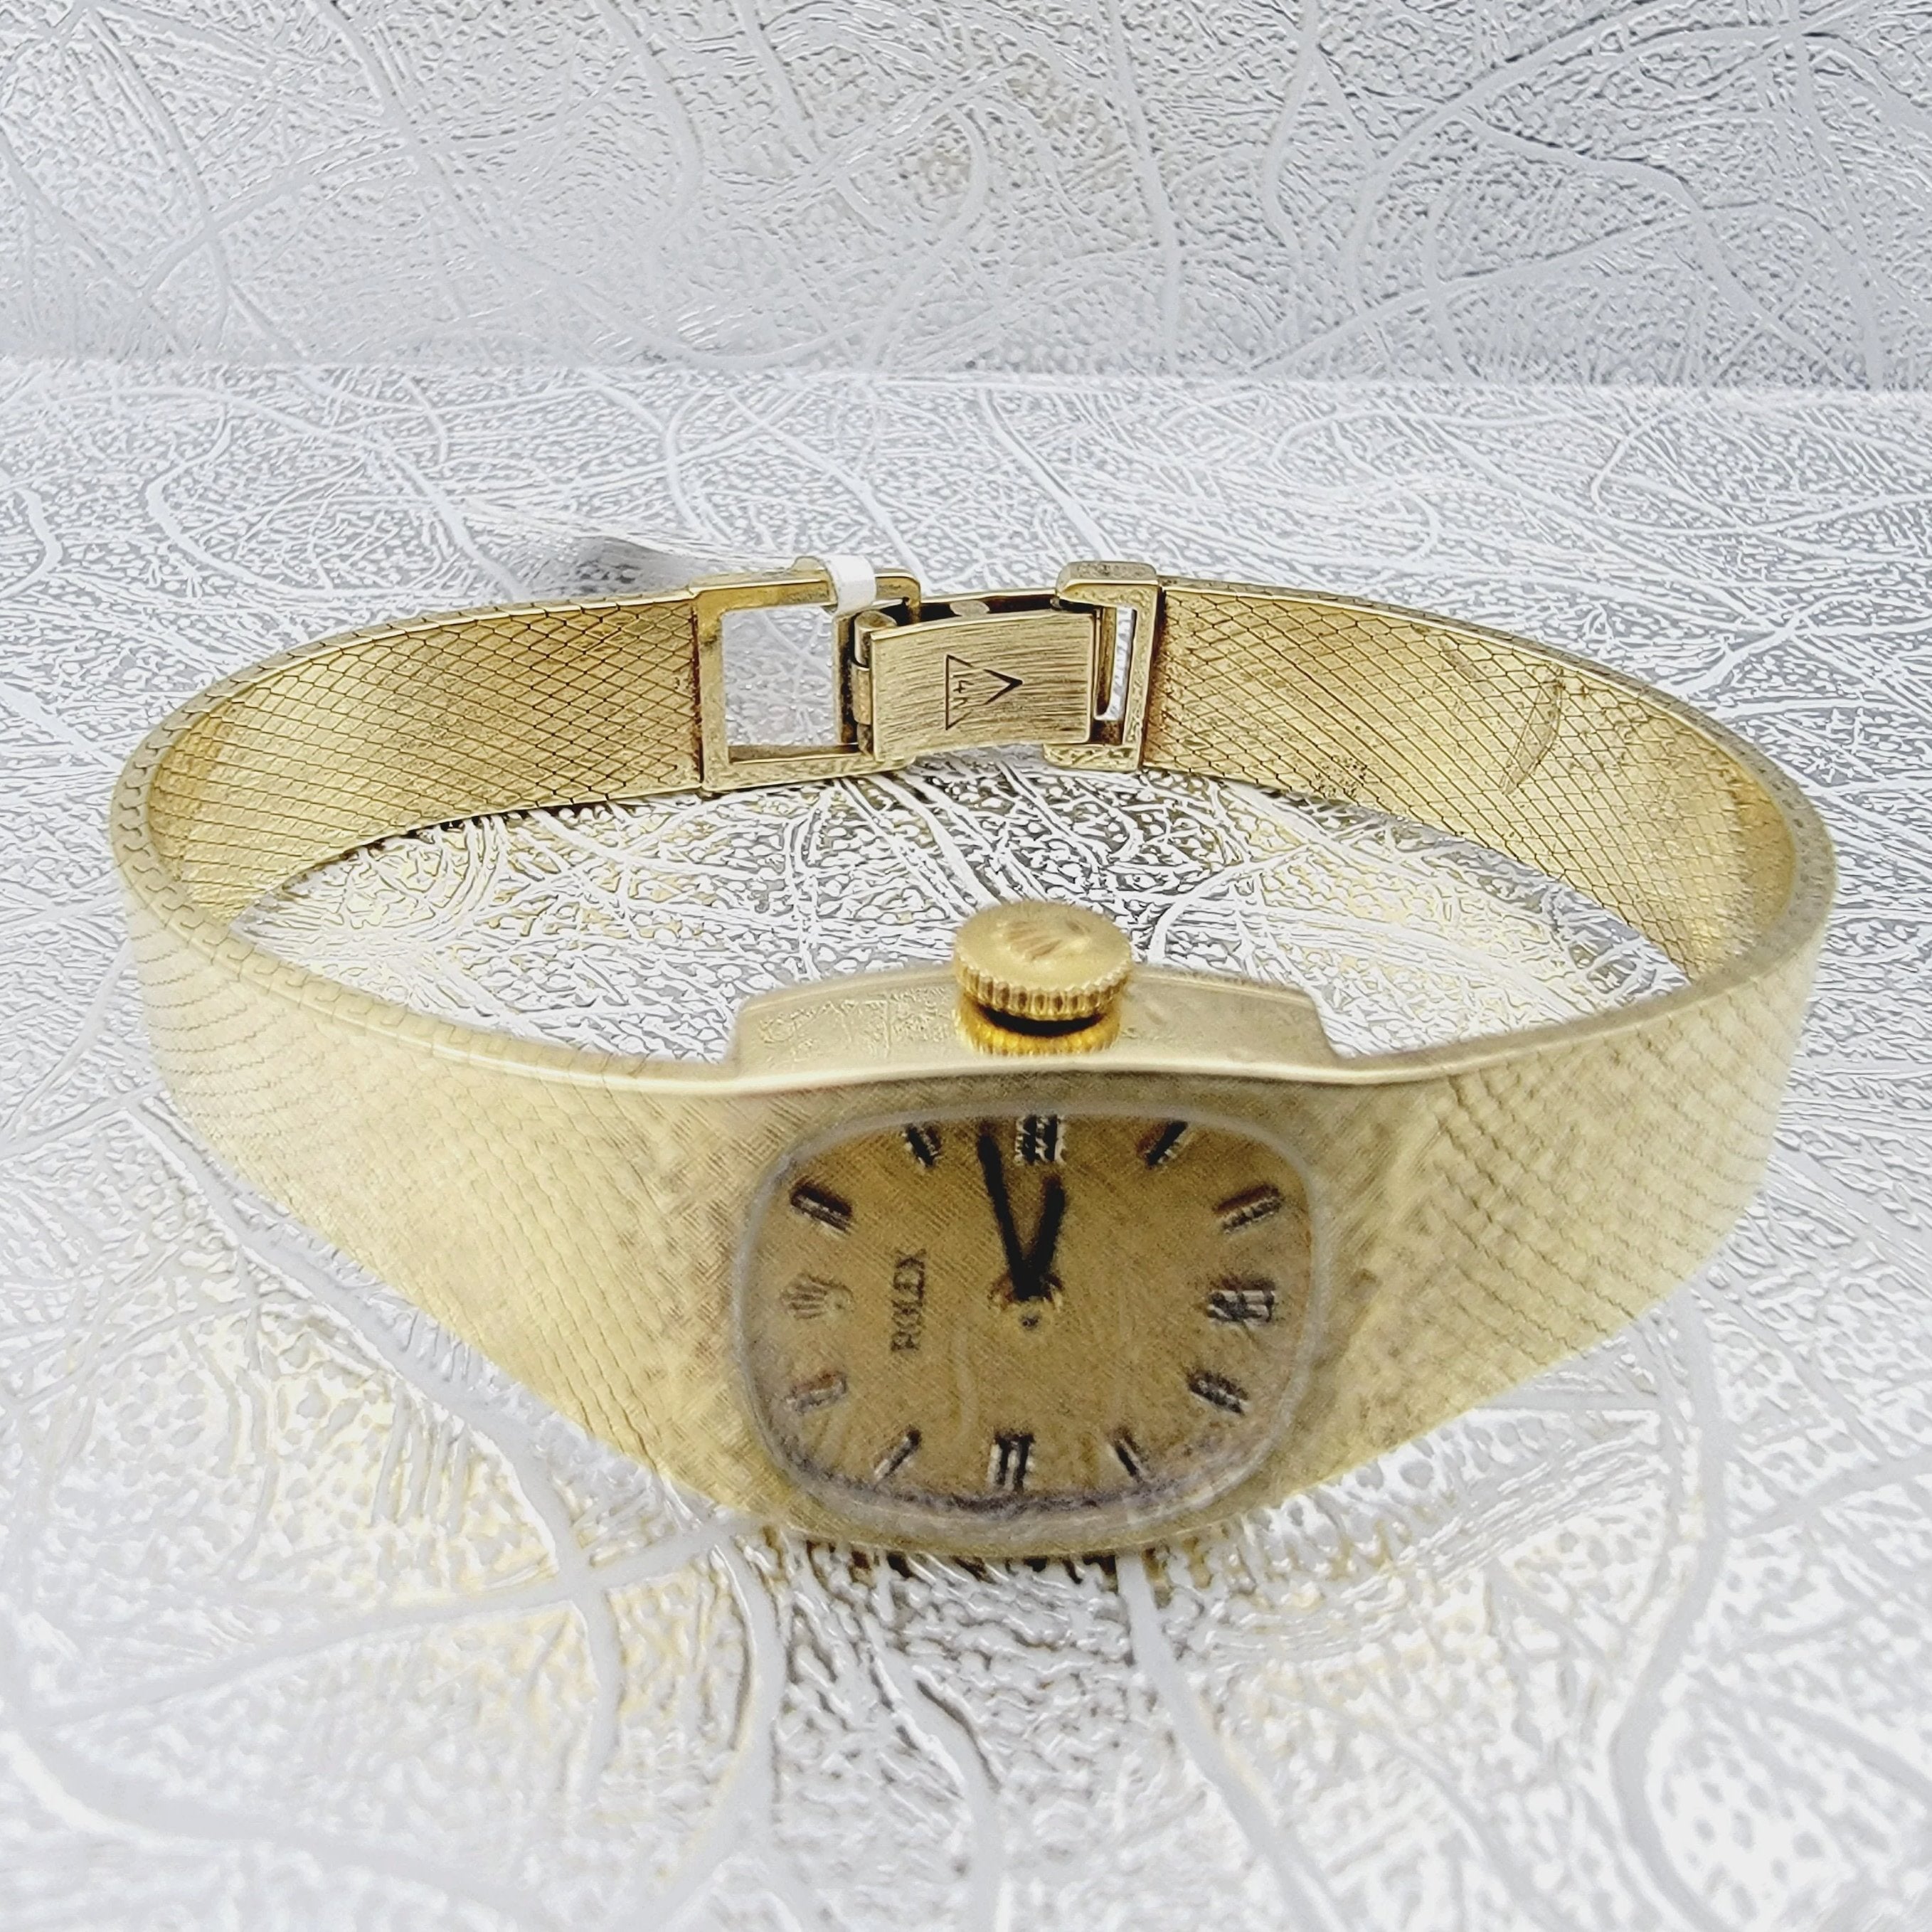 Ladies Rolex 1950's Cocktail 17mm Vintage Solid 14K Yellow Gold Watch with Gold Dial. (Pre-Owned)